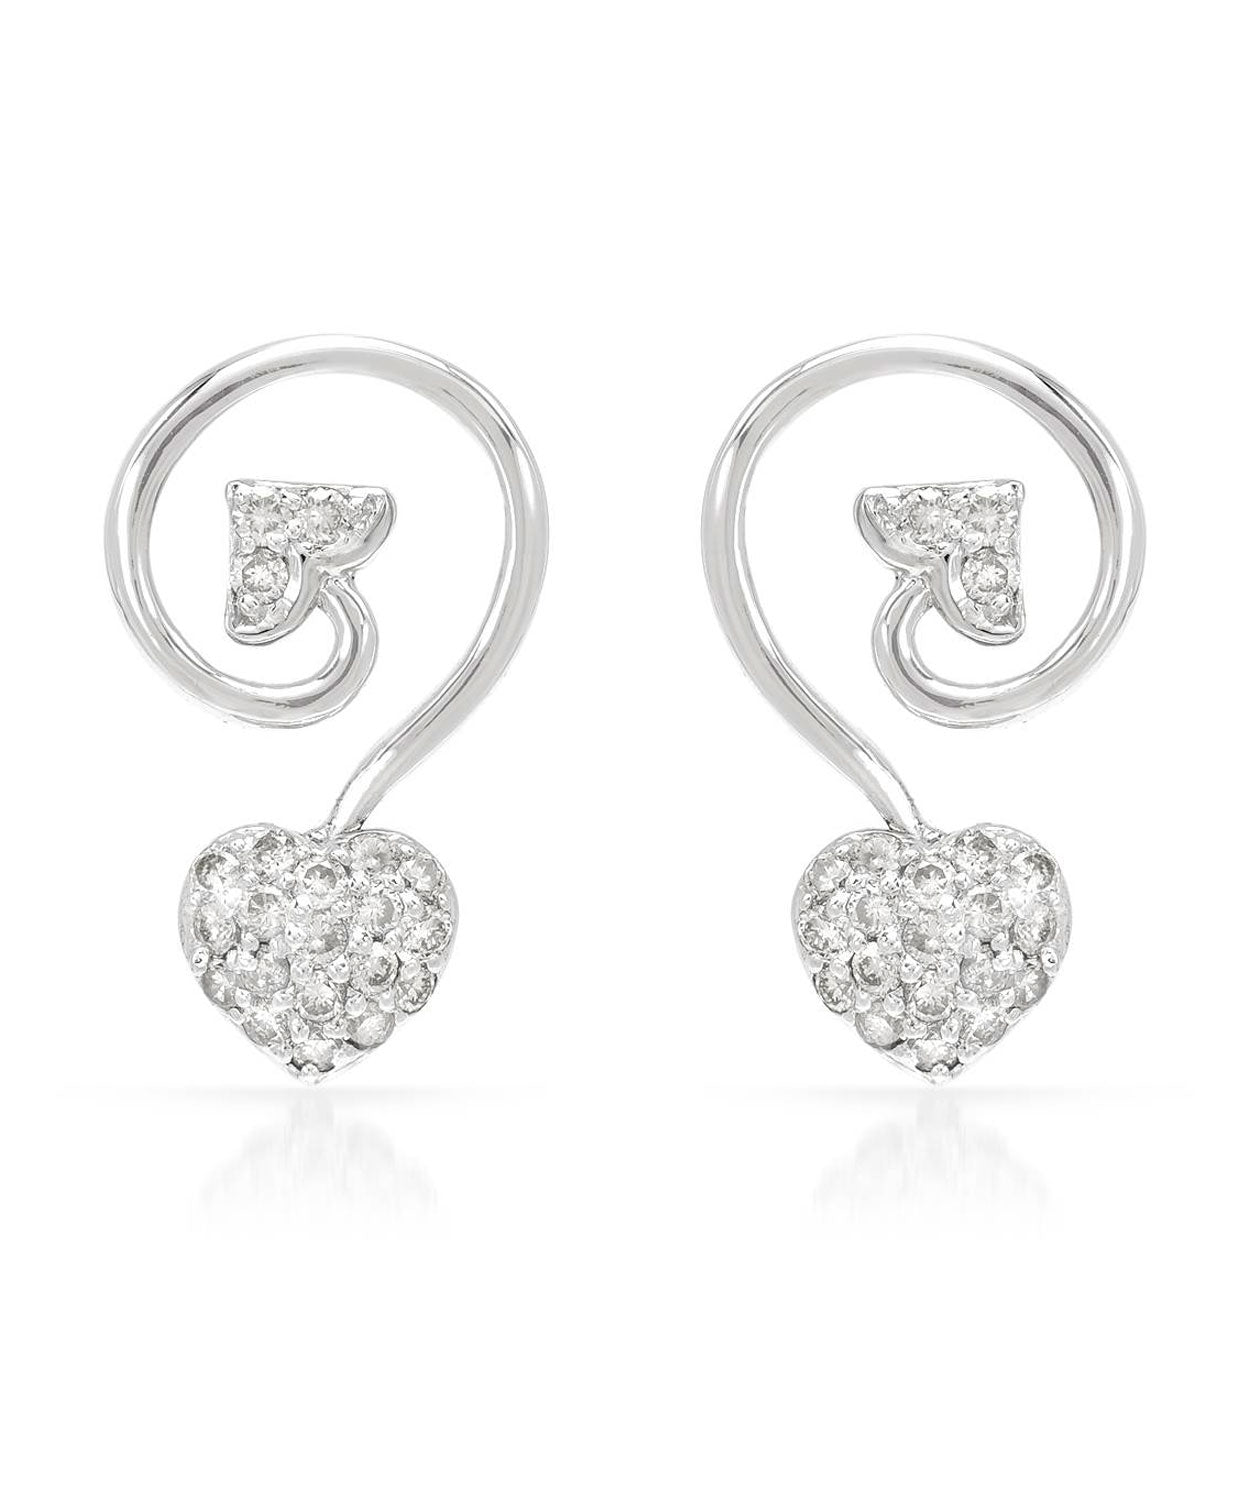 Love Story Collection 0.45 ctw Diamond 14k White Gold Heart Earrings View 1